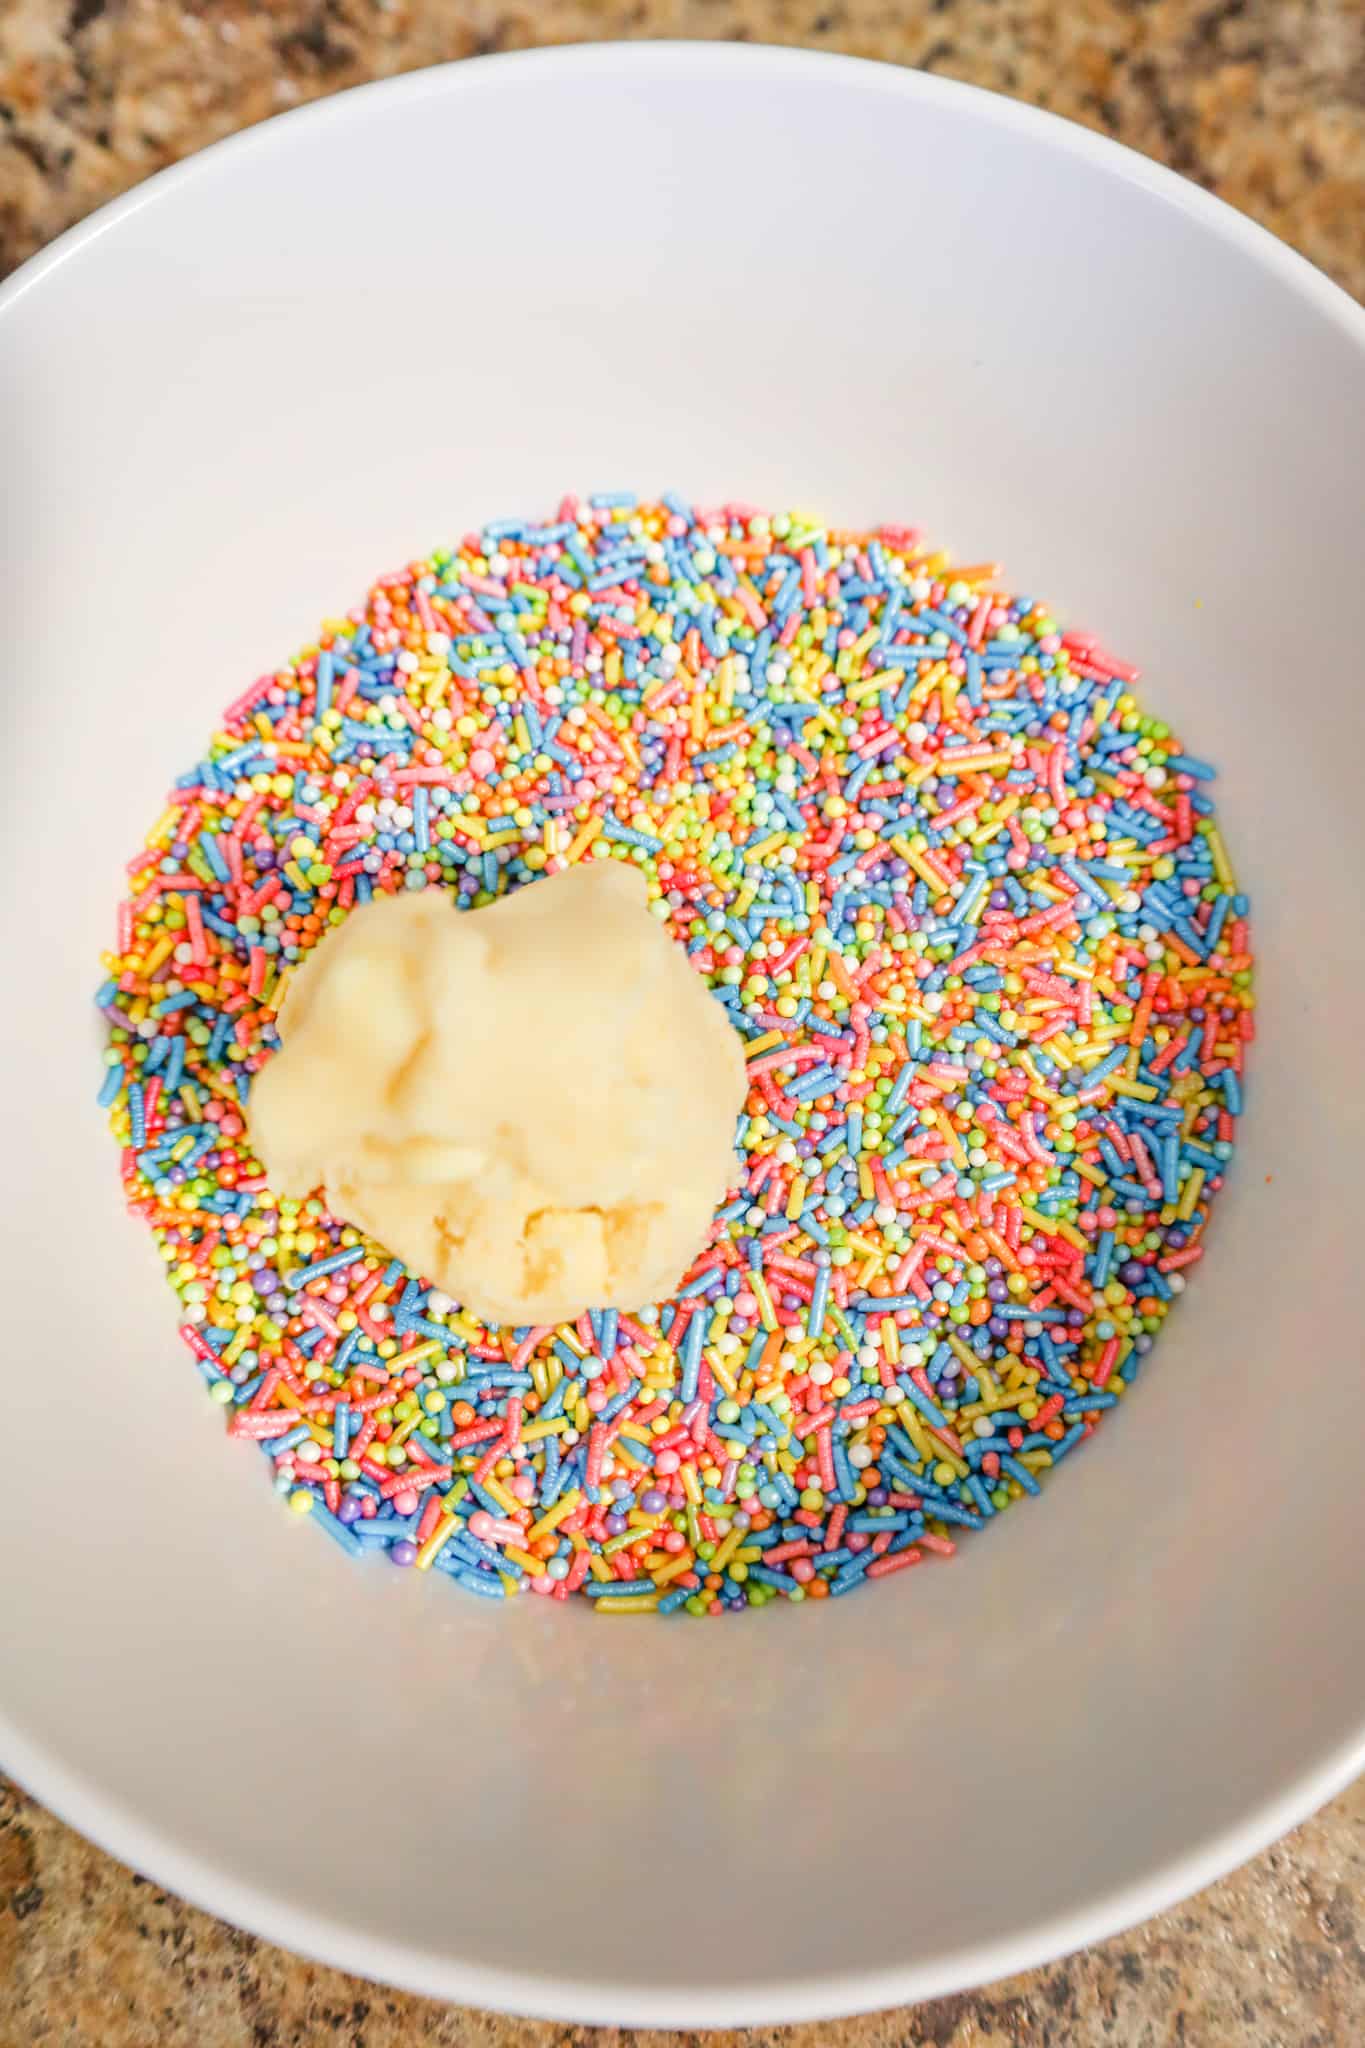 ball of cookie dough in a bowl of rainbow sprinkles